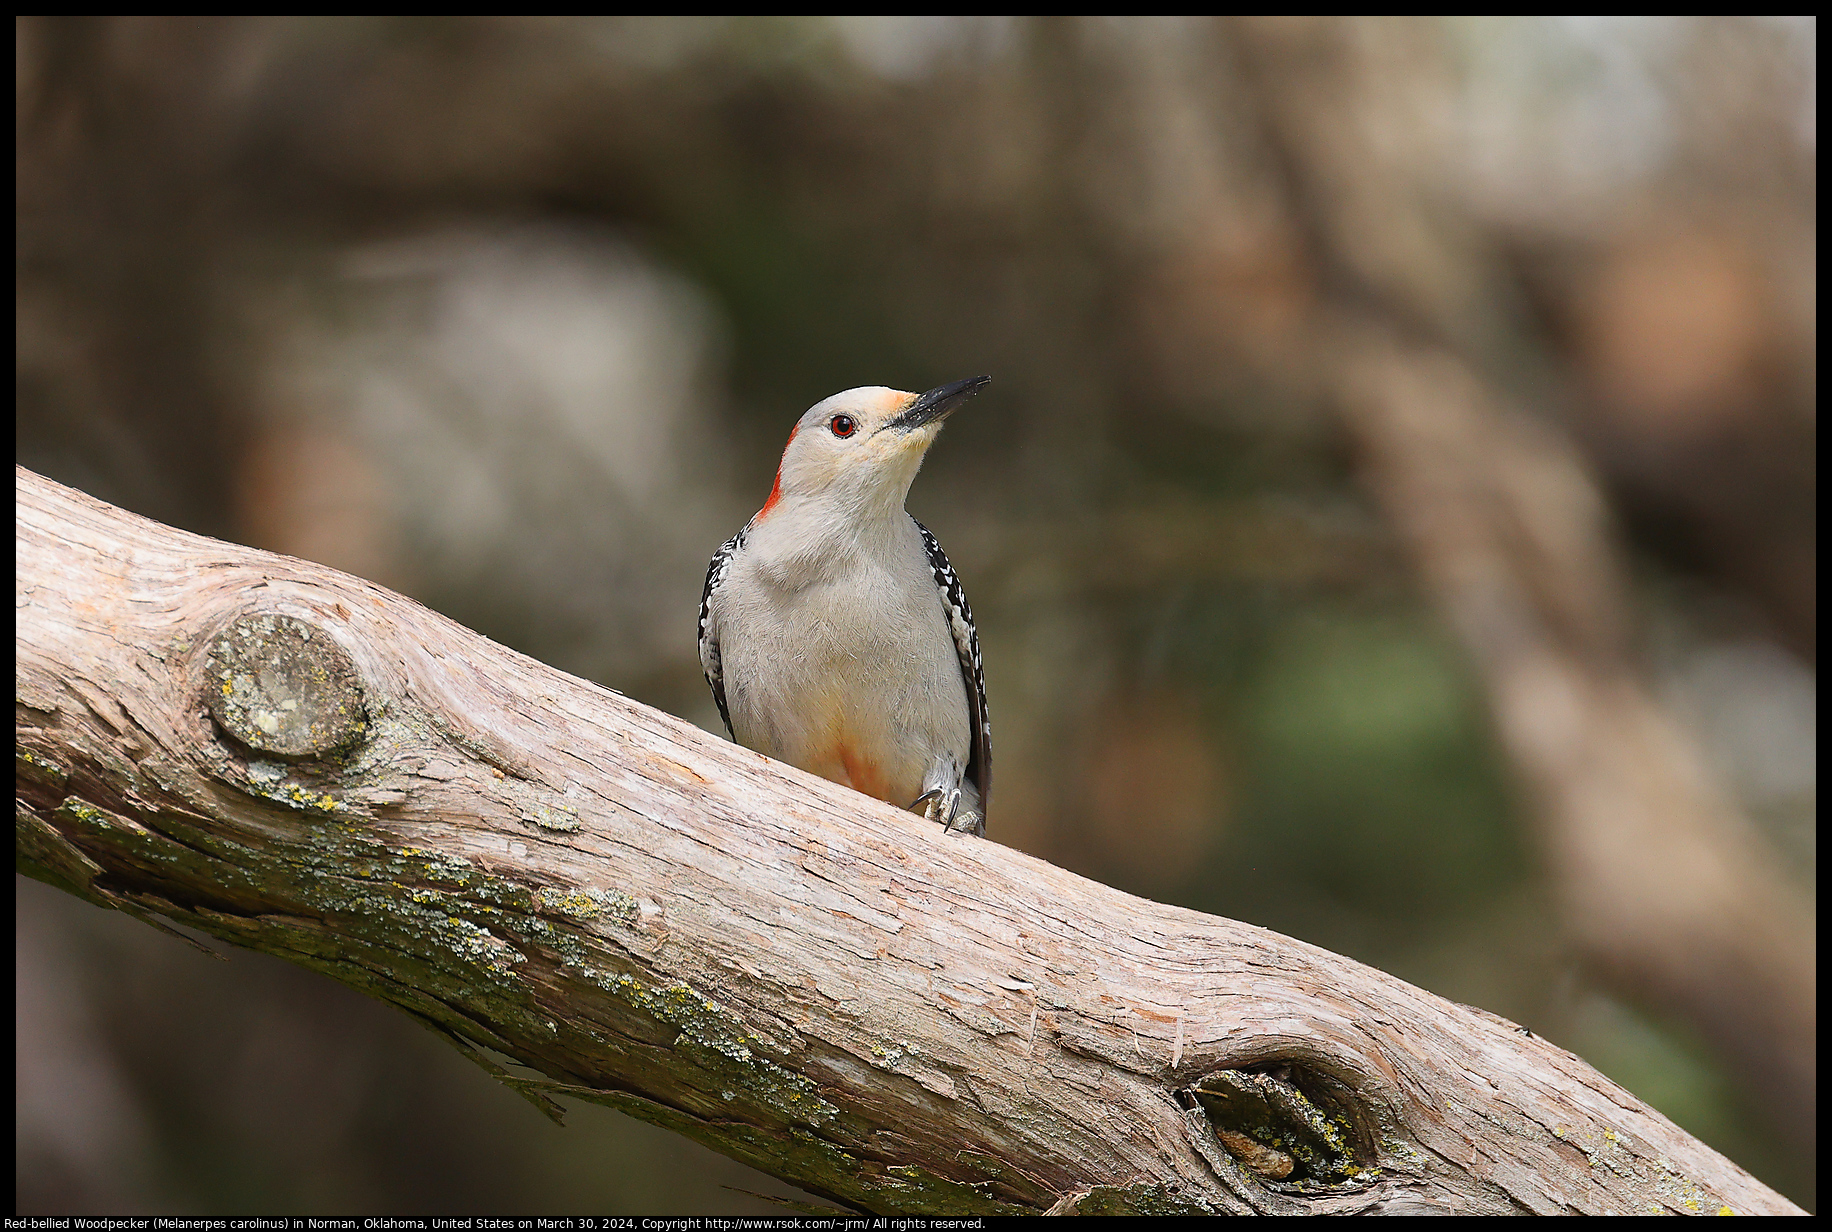 Red-bellied Woodpecker (Melanerpes carolinus) in Norman, Oklahoma, United States on March 30, 2024